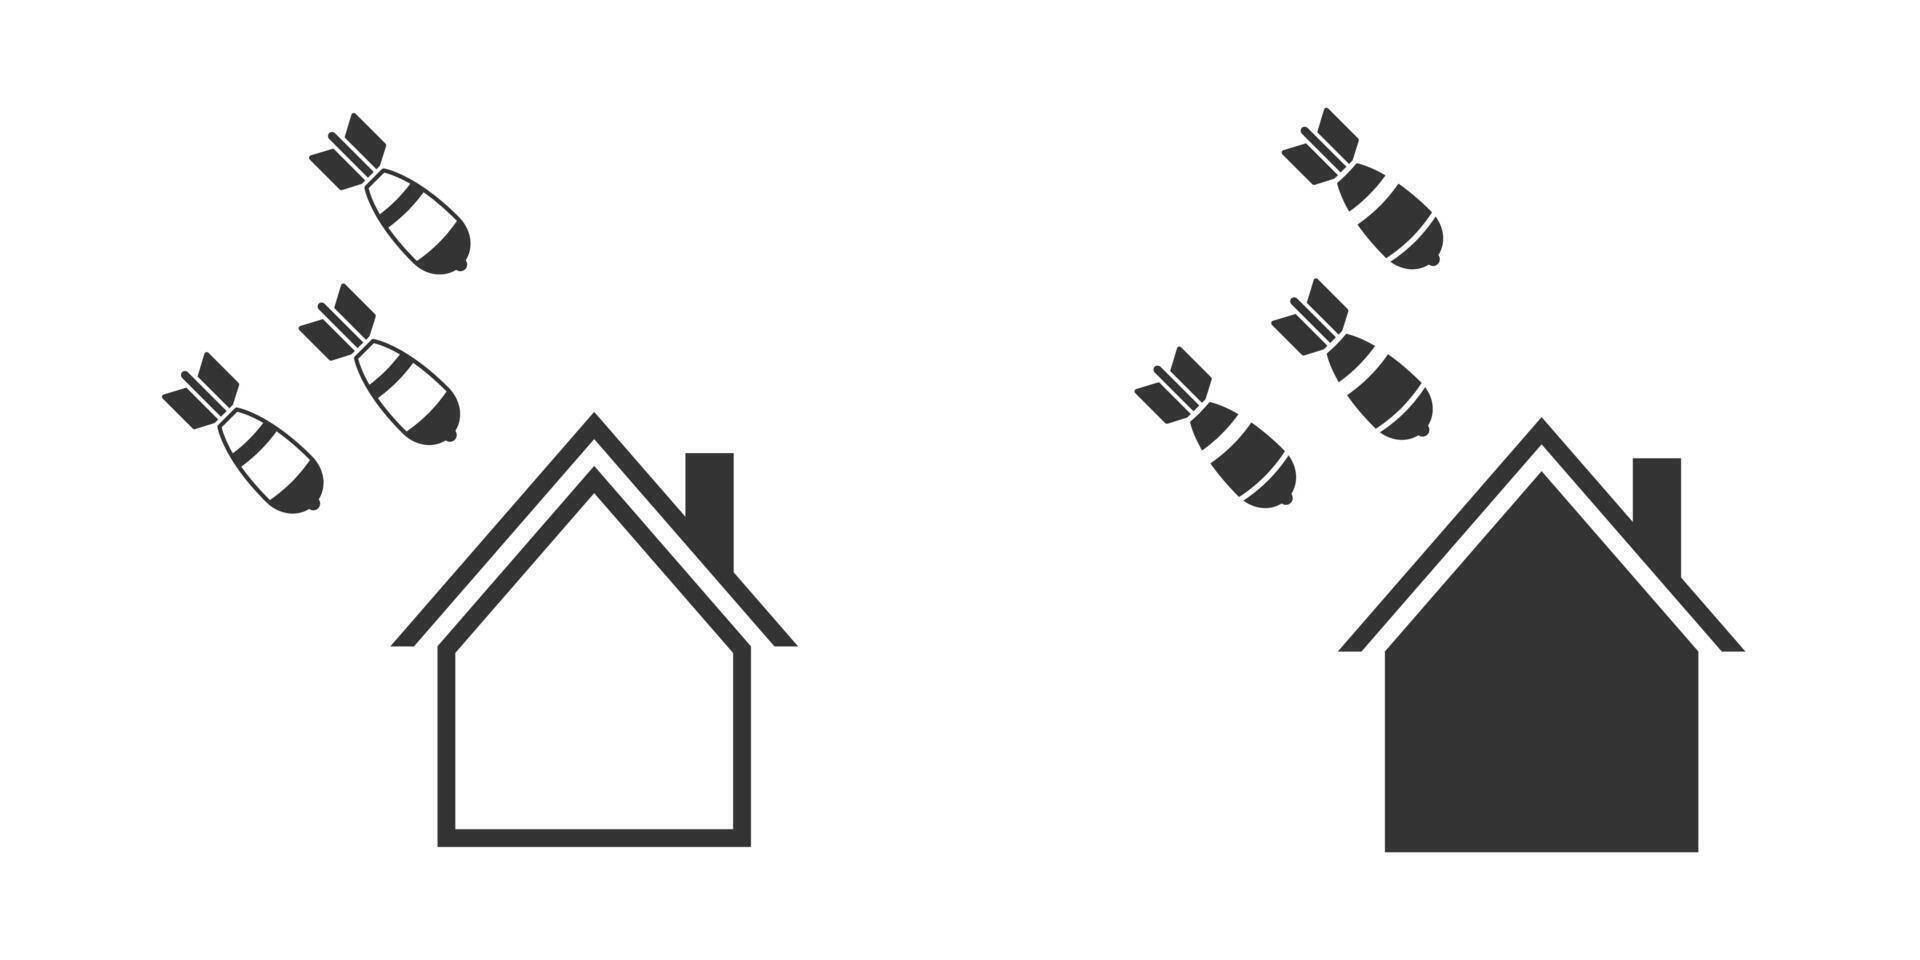 Bombs falling on a house icon. Vector illustration.